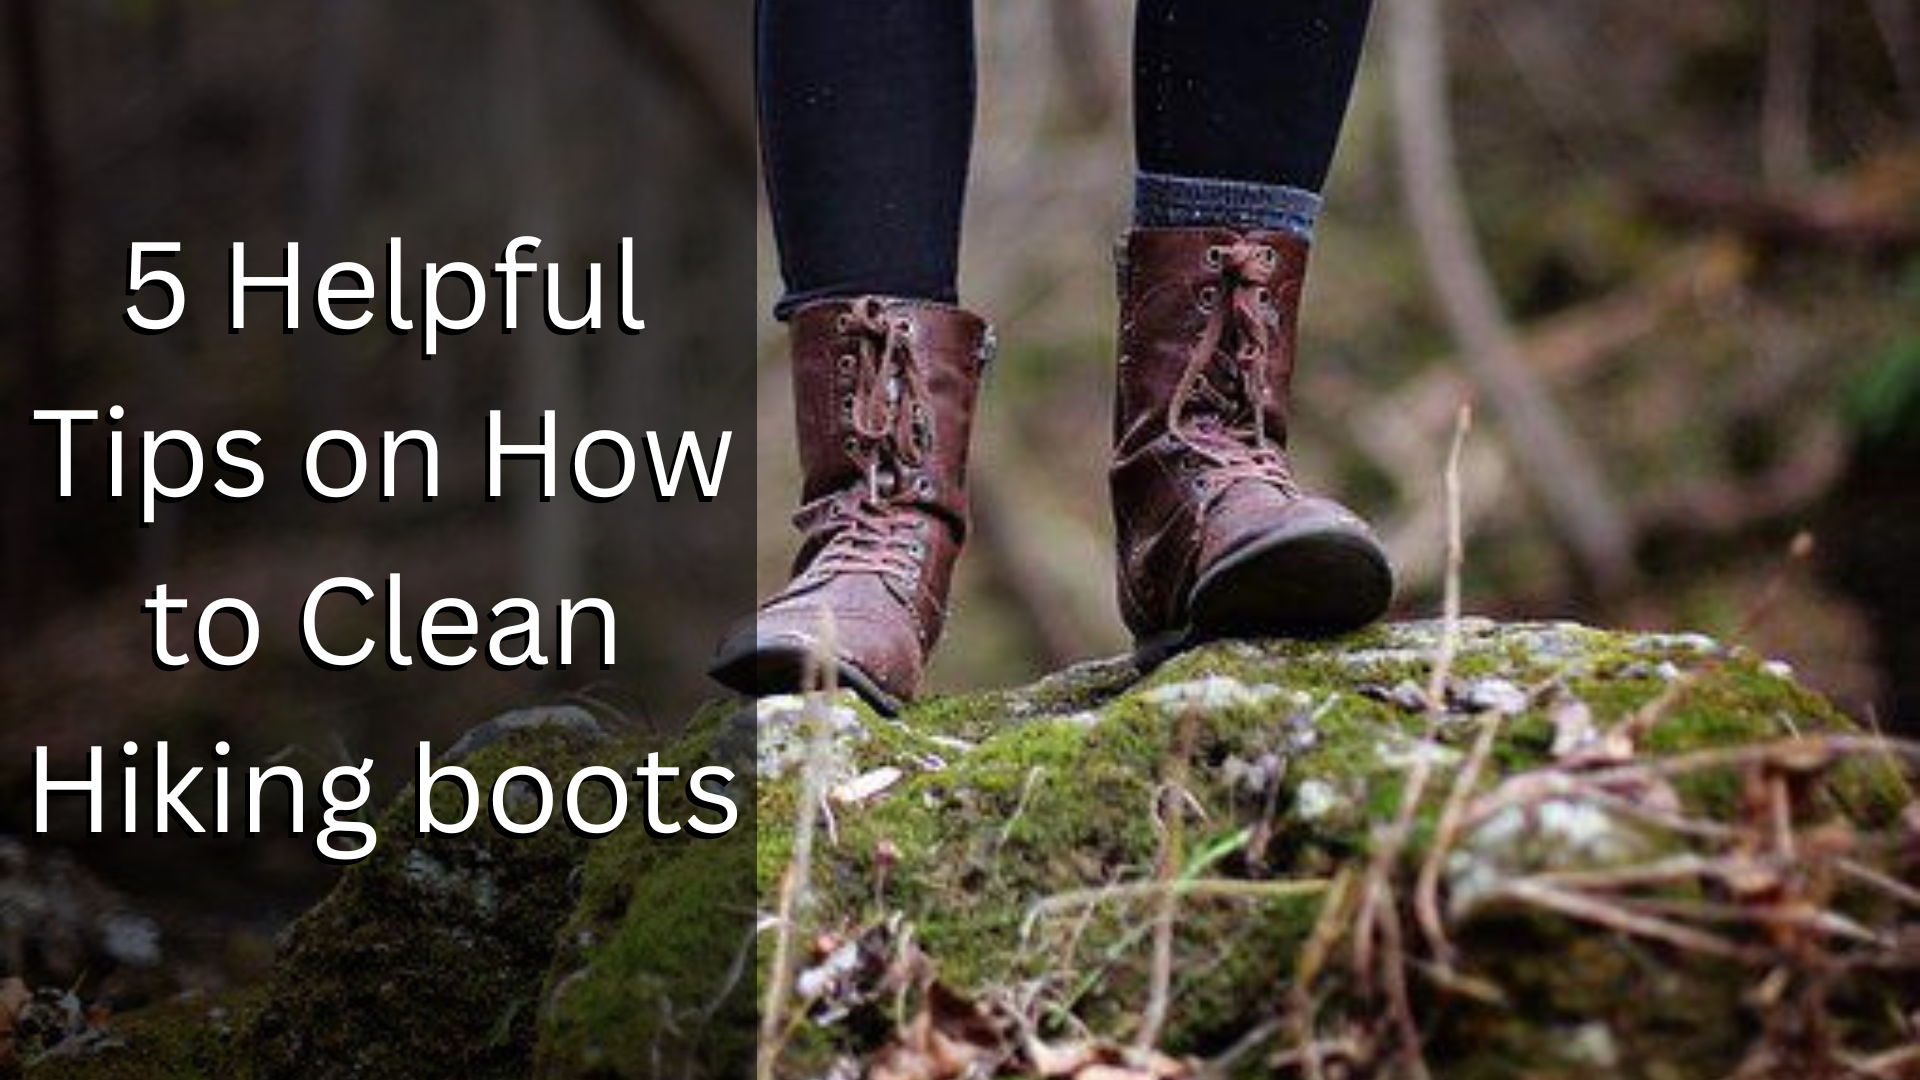 5 Helpful Tips on How to Clean Hiking boots - Outdoorsymore.com